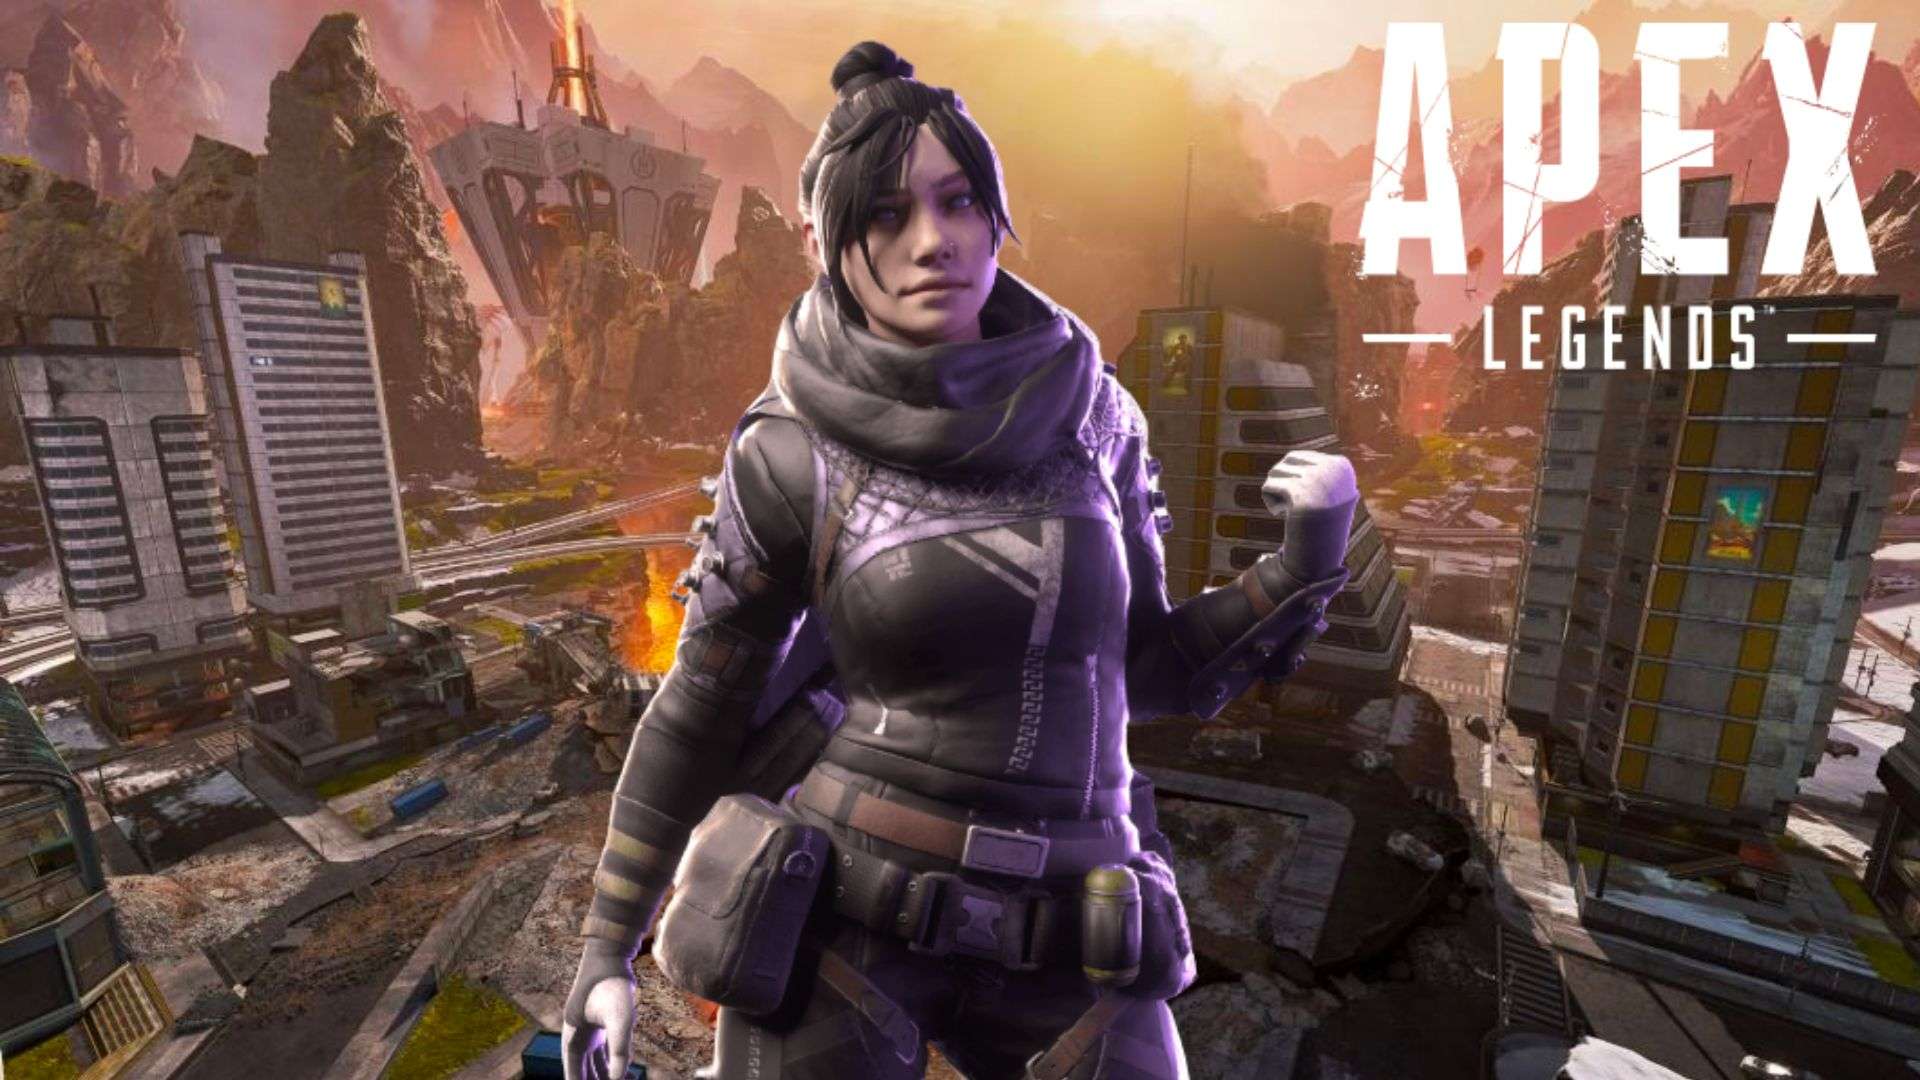 Wraith stood on Fragment in World's Edge in Apex Legends